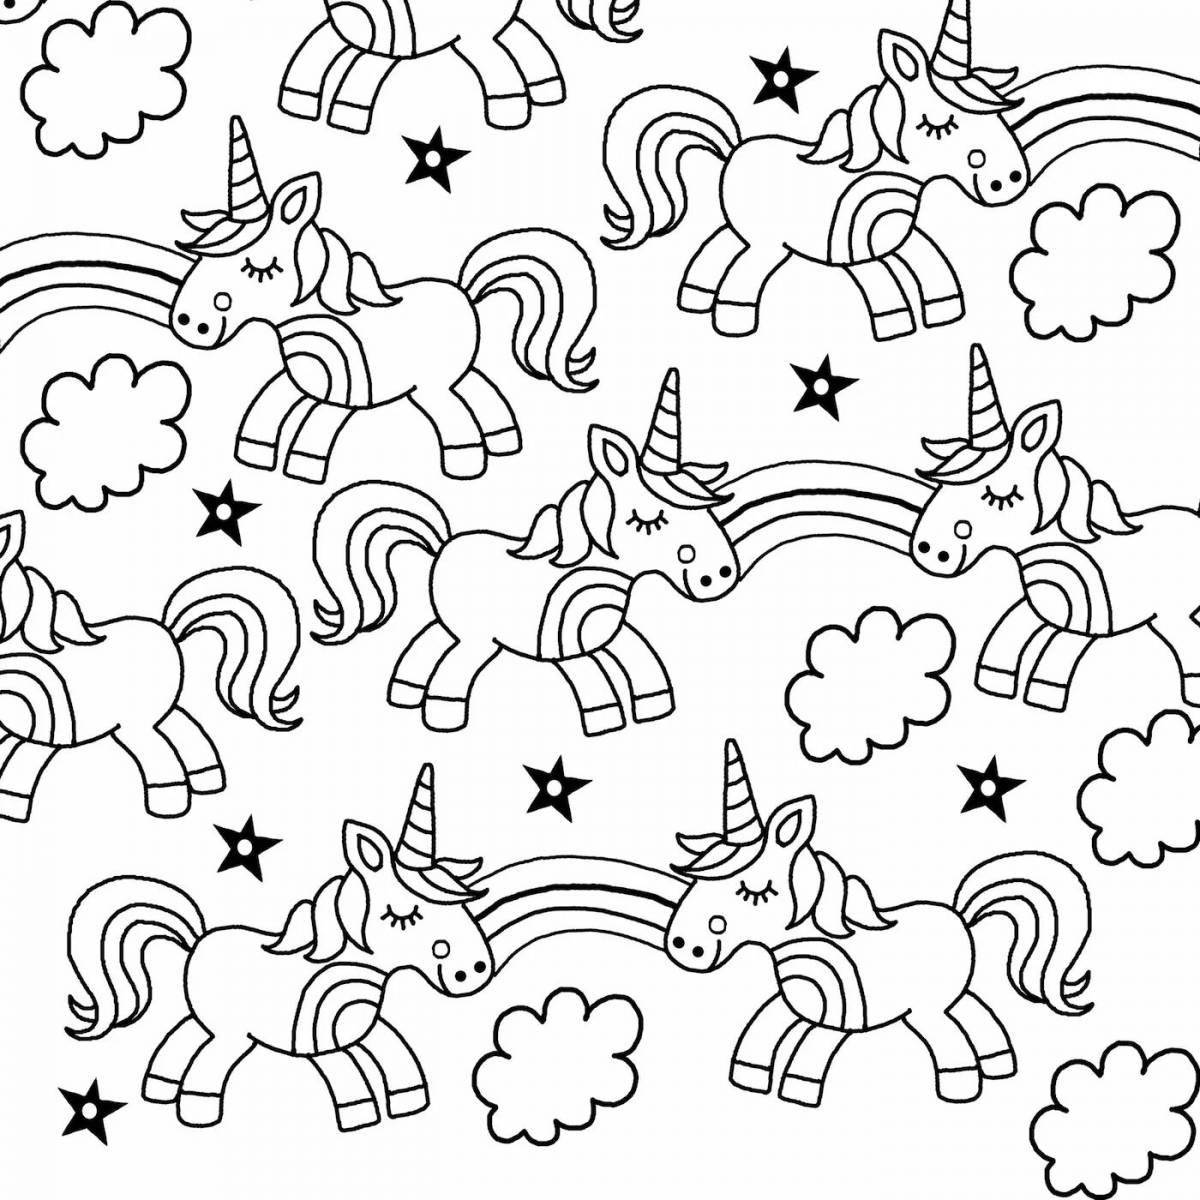 Color-surge coloring page many at once